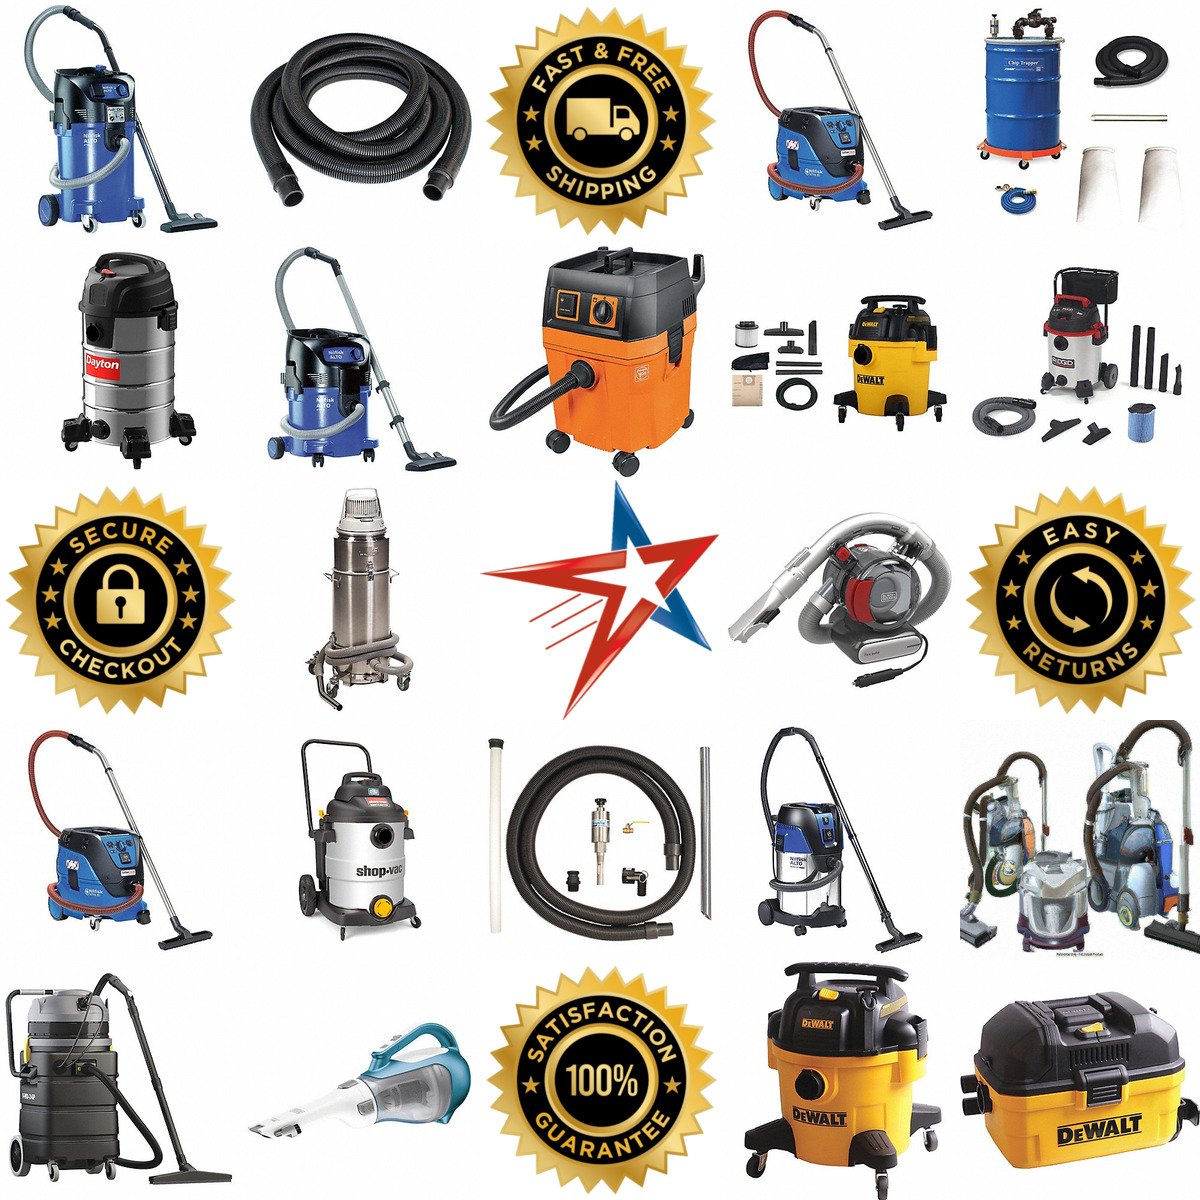 A selection of Shop Vacuum Cleaners products on GoVets